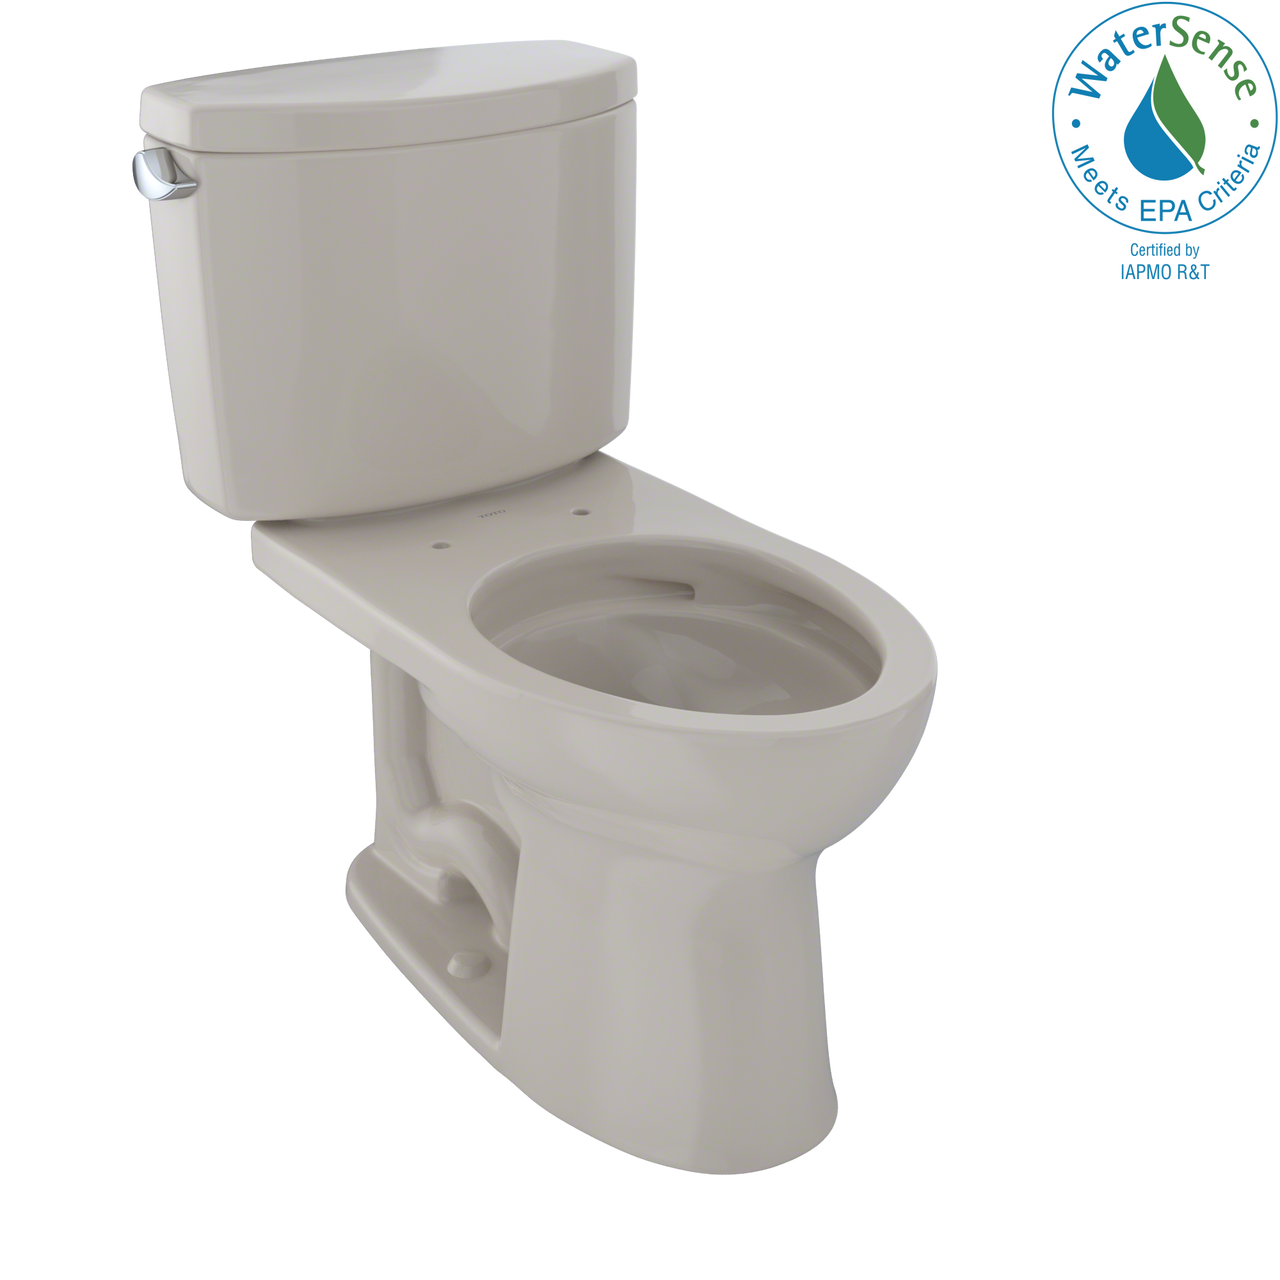 TOTO Drake II Two-Piece Elongated 1.28 GPF Universal Height Toilet with CeFiONtect,  - CST454CEFG#03 - BNGBath